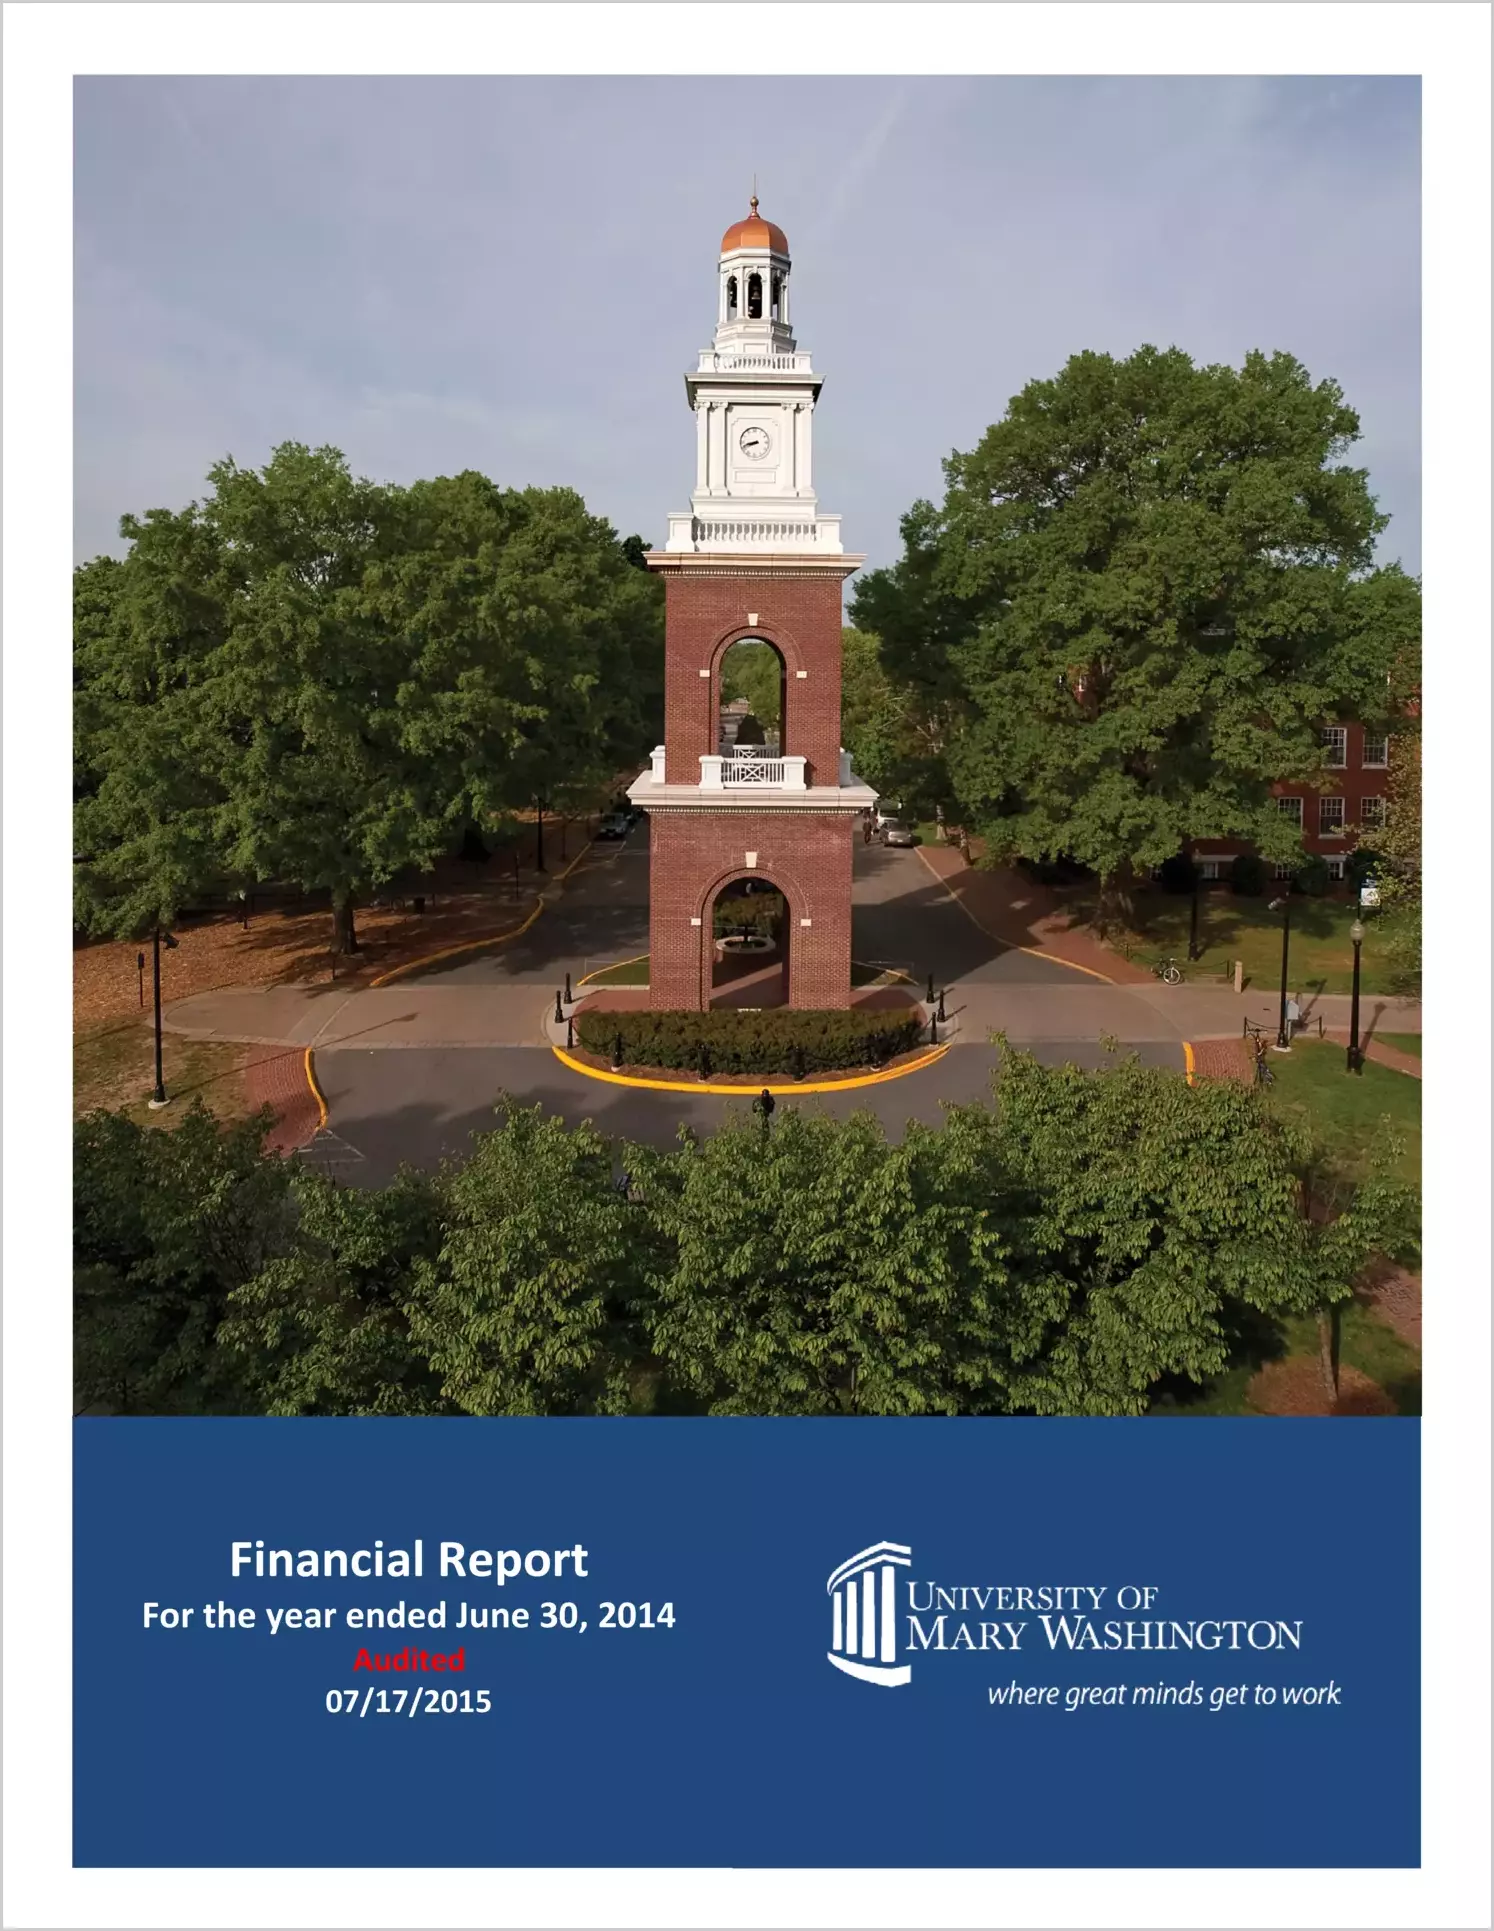 University of Mary Washington Financial Statements for the year ended June 30, 2014